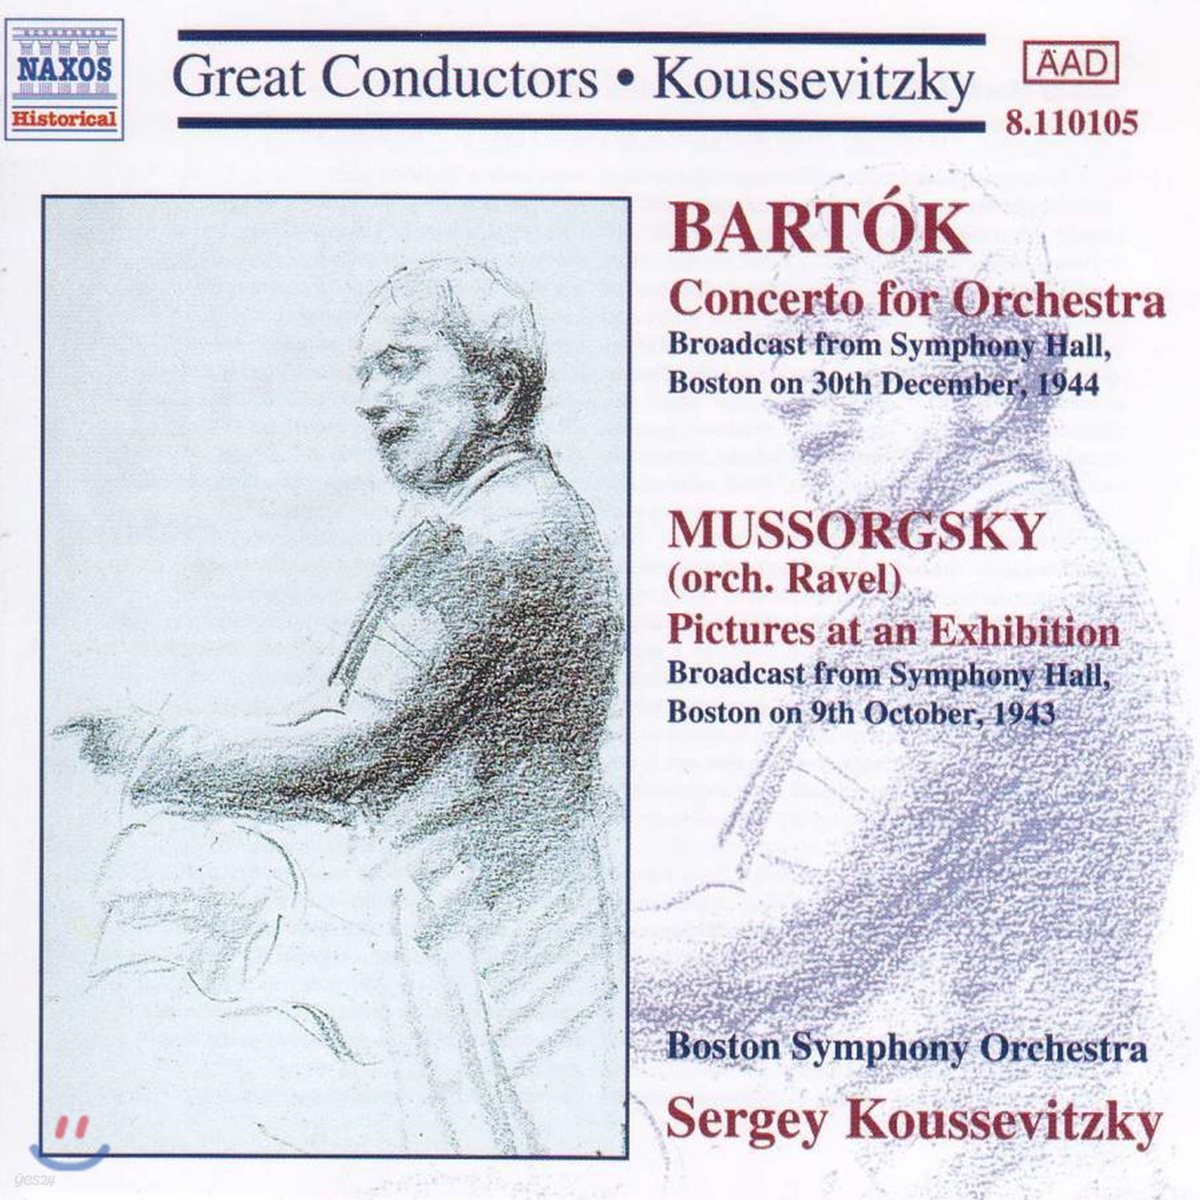 Serge Koussevitzky 바르톡: 관현악 협주곡 / 무소르그스키: 전람회의 그림 (Bartok: Concerto for Orchestra / Mussorgsky: Pictures At An Exhibition)